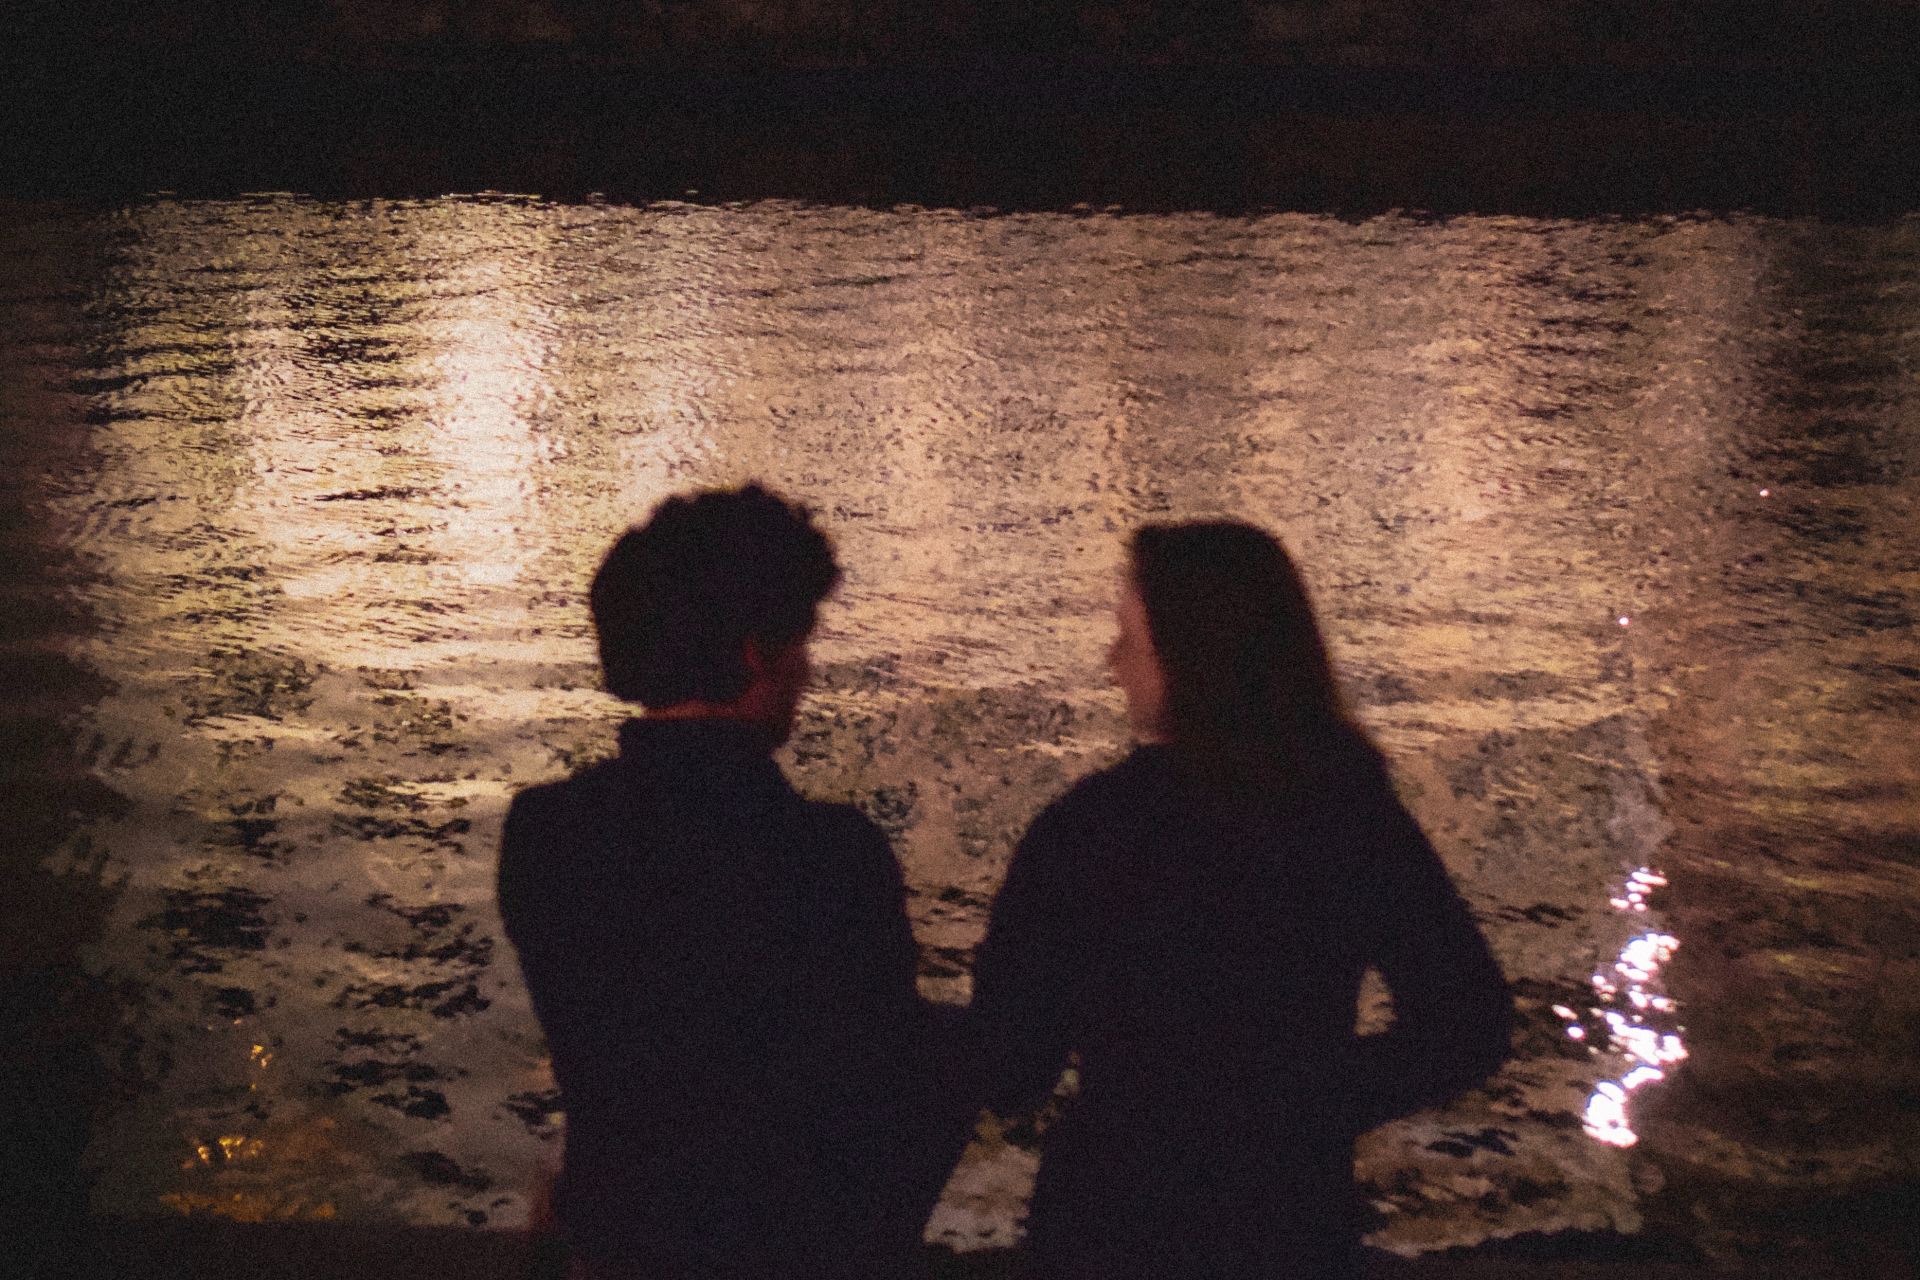 silhouette of man and woman standing beside body of water during night time